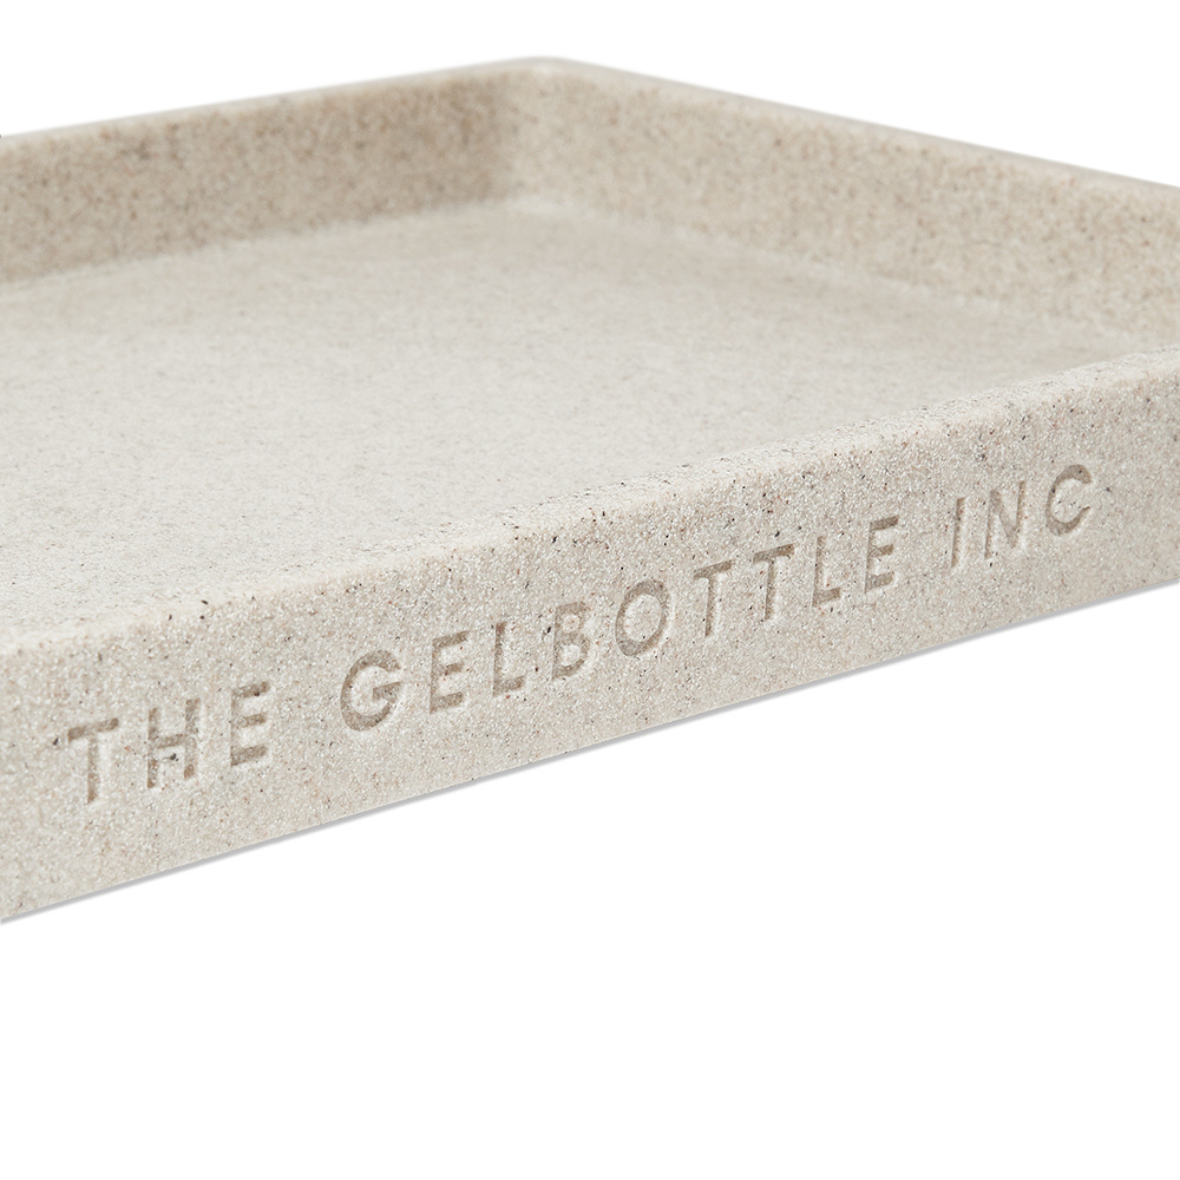 The GelBottle Spa™ Display Tray